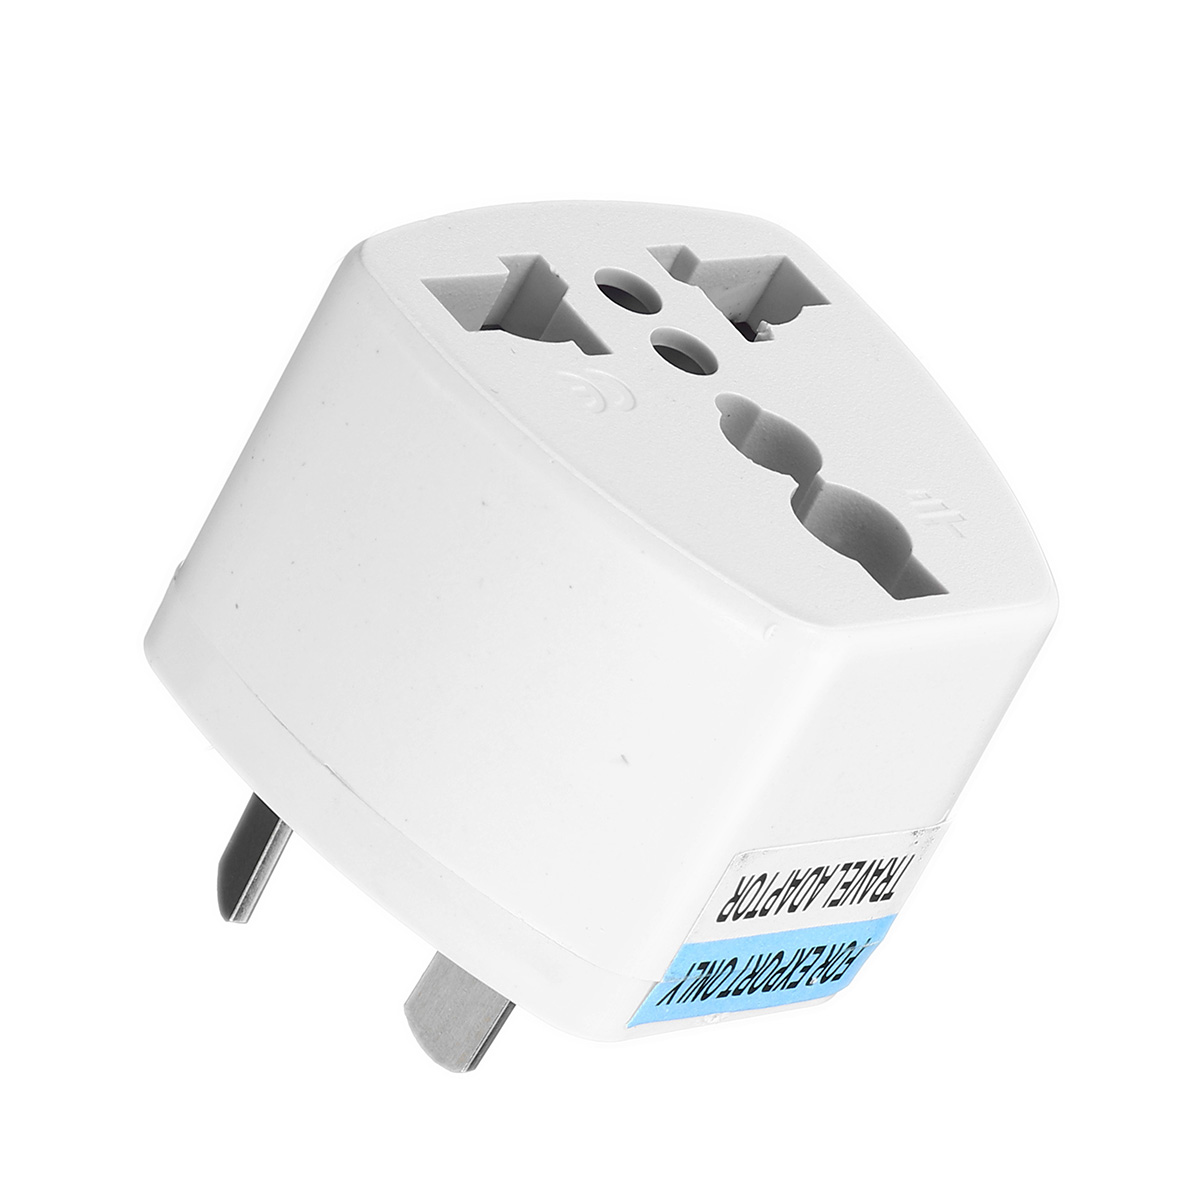 Find US UK EU to AU NZ New Zealand CN AC Power Plug Adapter Travel Converter for Sale on Gipsybee.com with cryptocurrencies